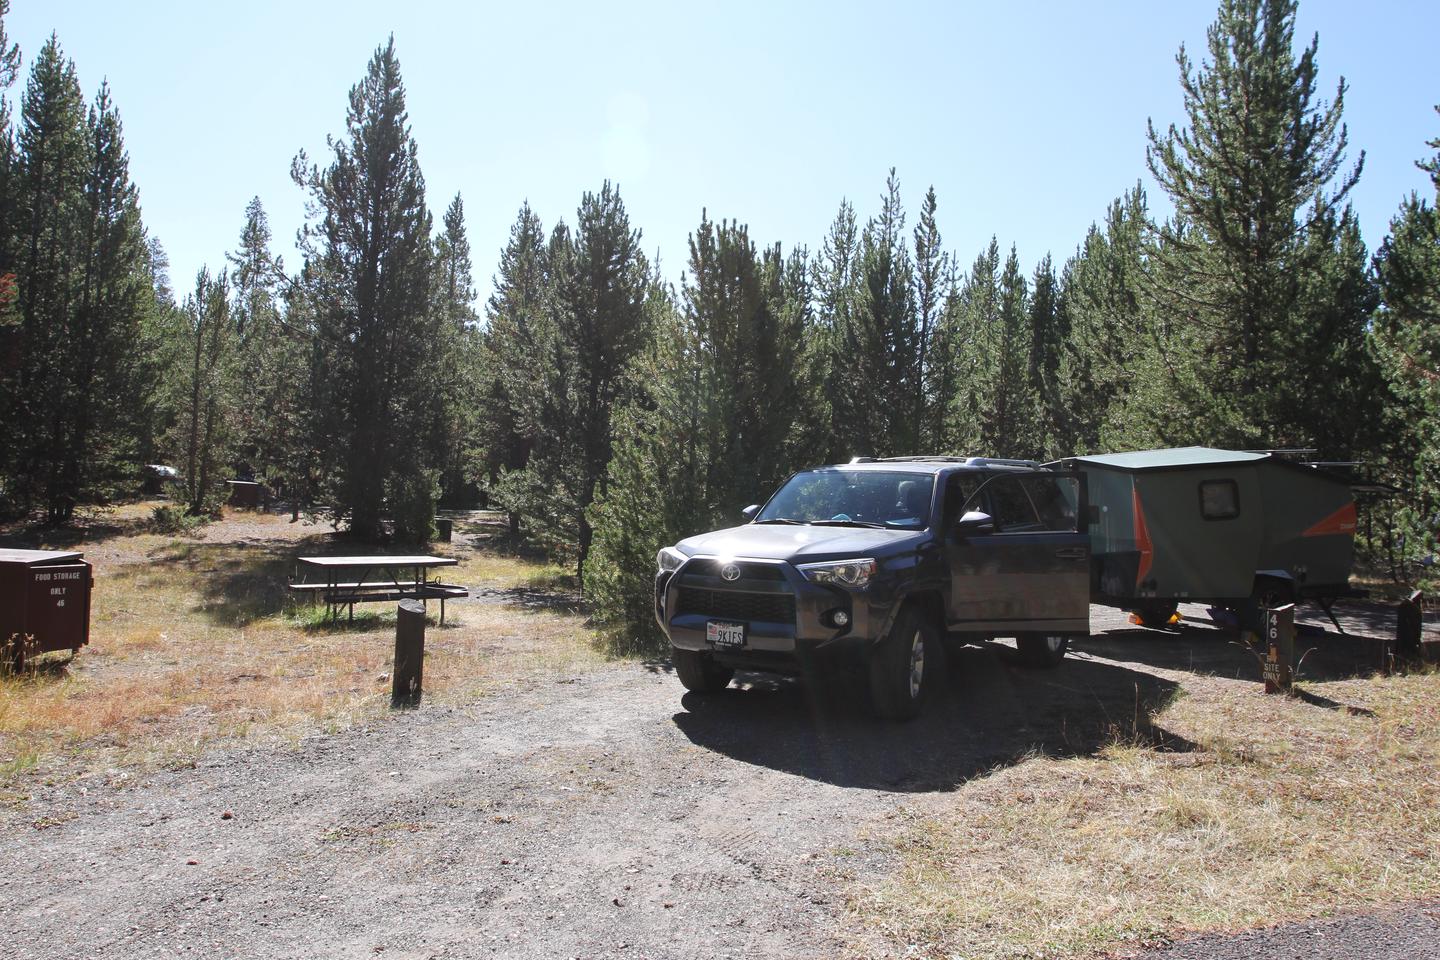 Indian Creek Campground site #46